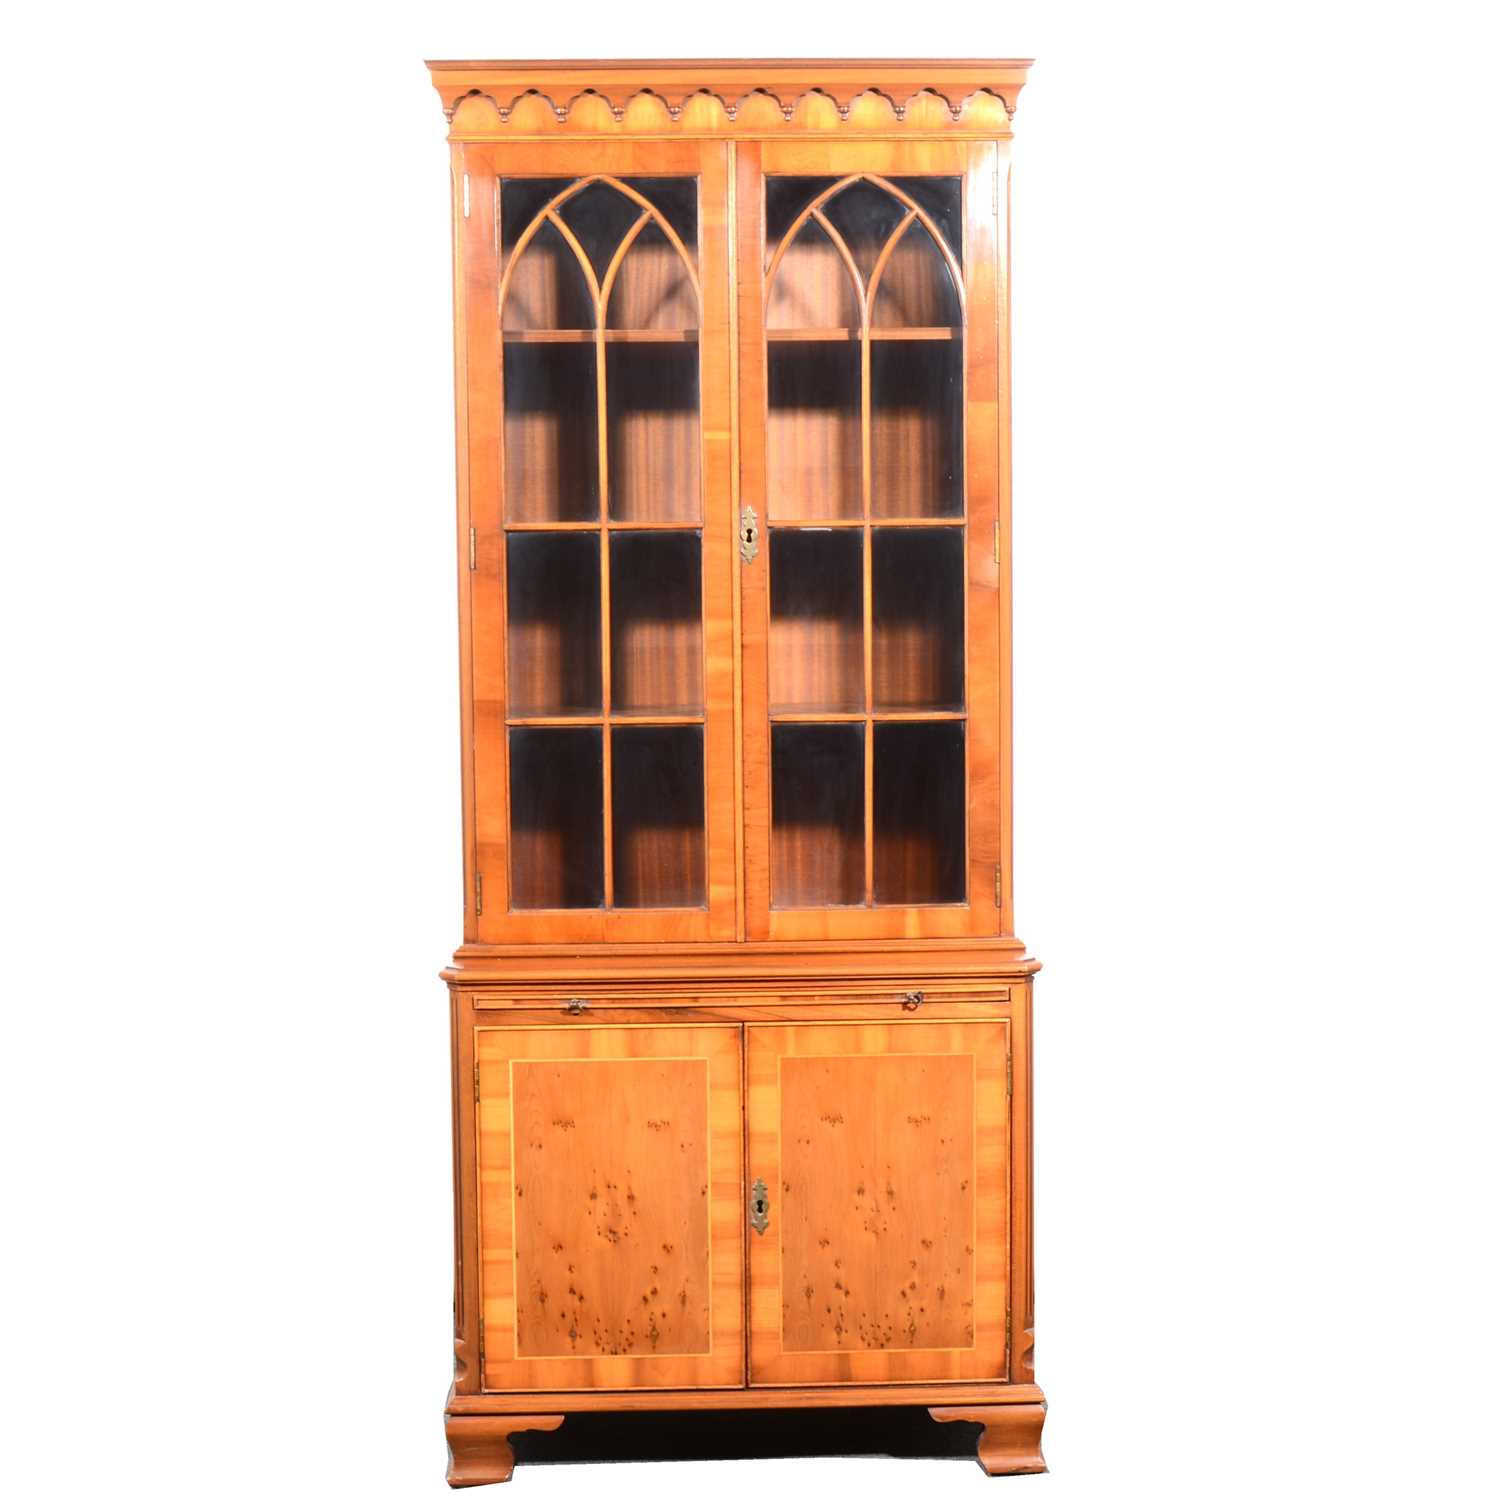 Lot 143 - A reproduction yew wood bookcase and a reproduction mahogany finish freestanding corner cupboard